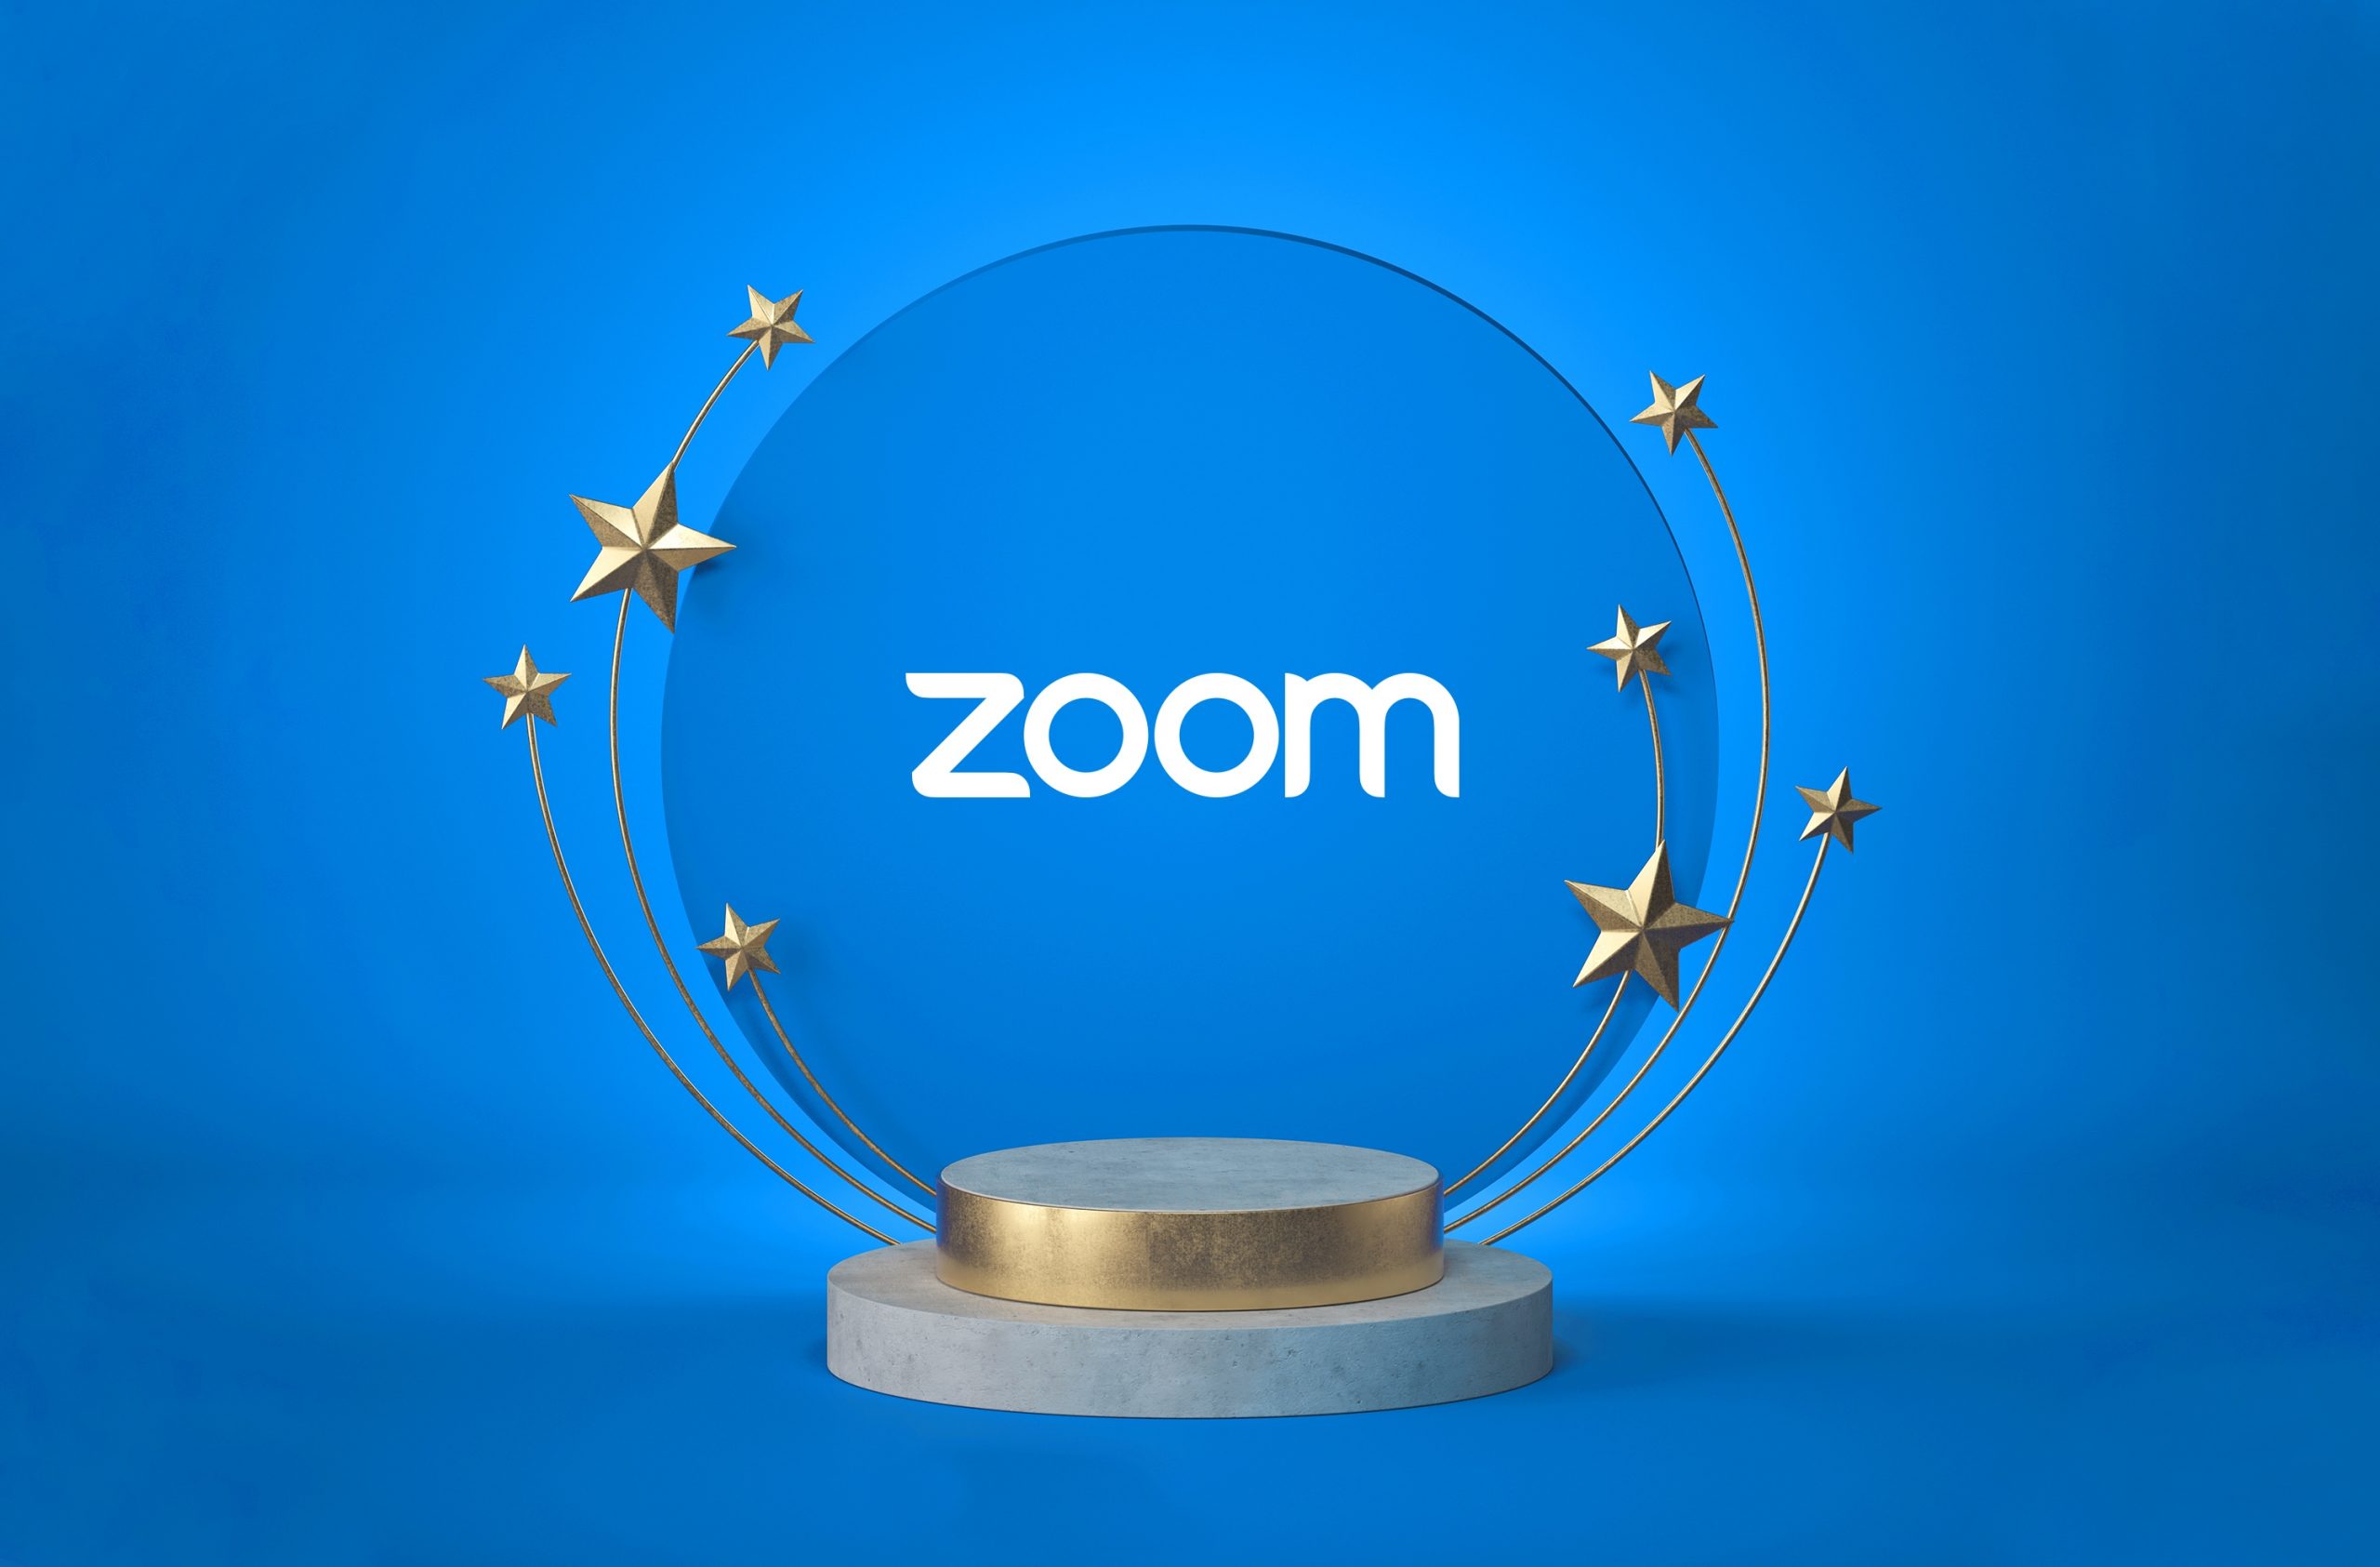 Zoom: A Best Place To Work In 2021!